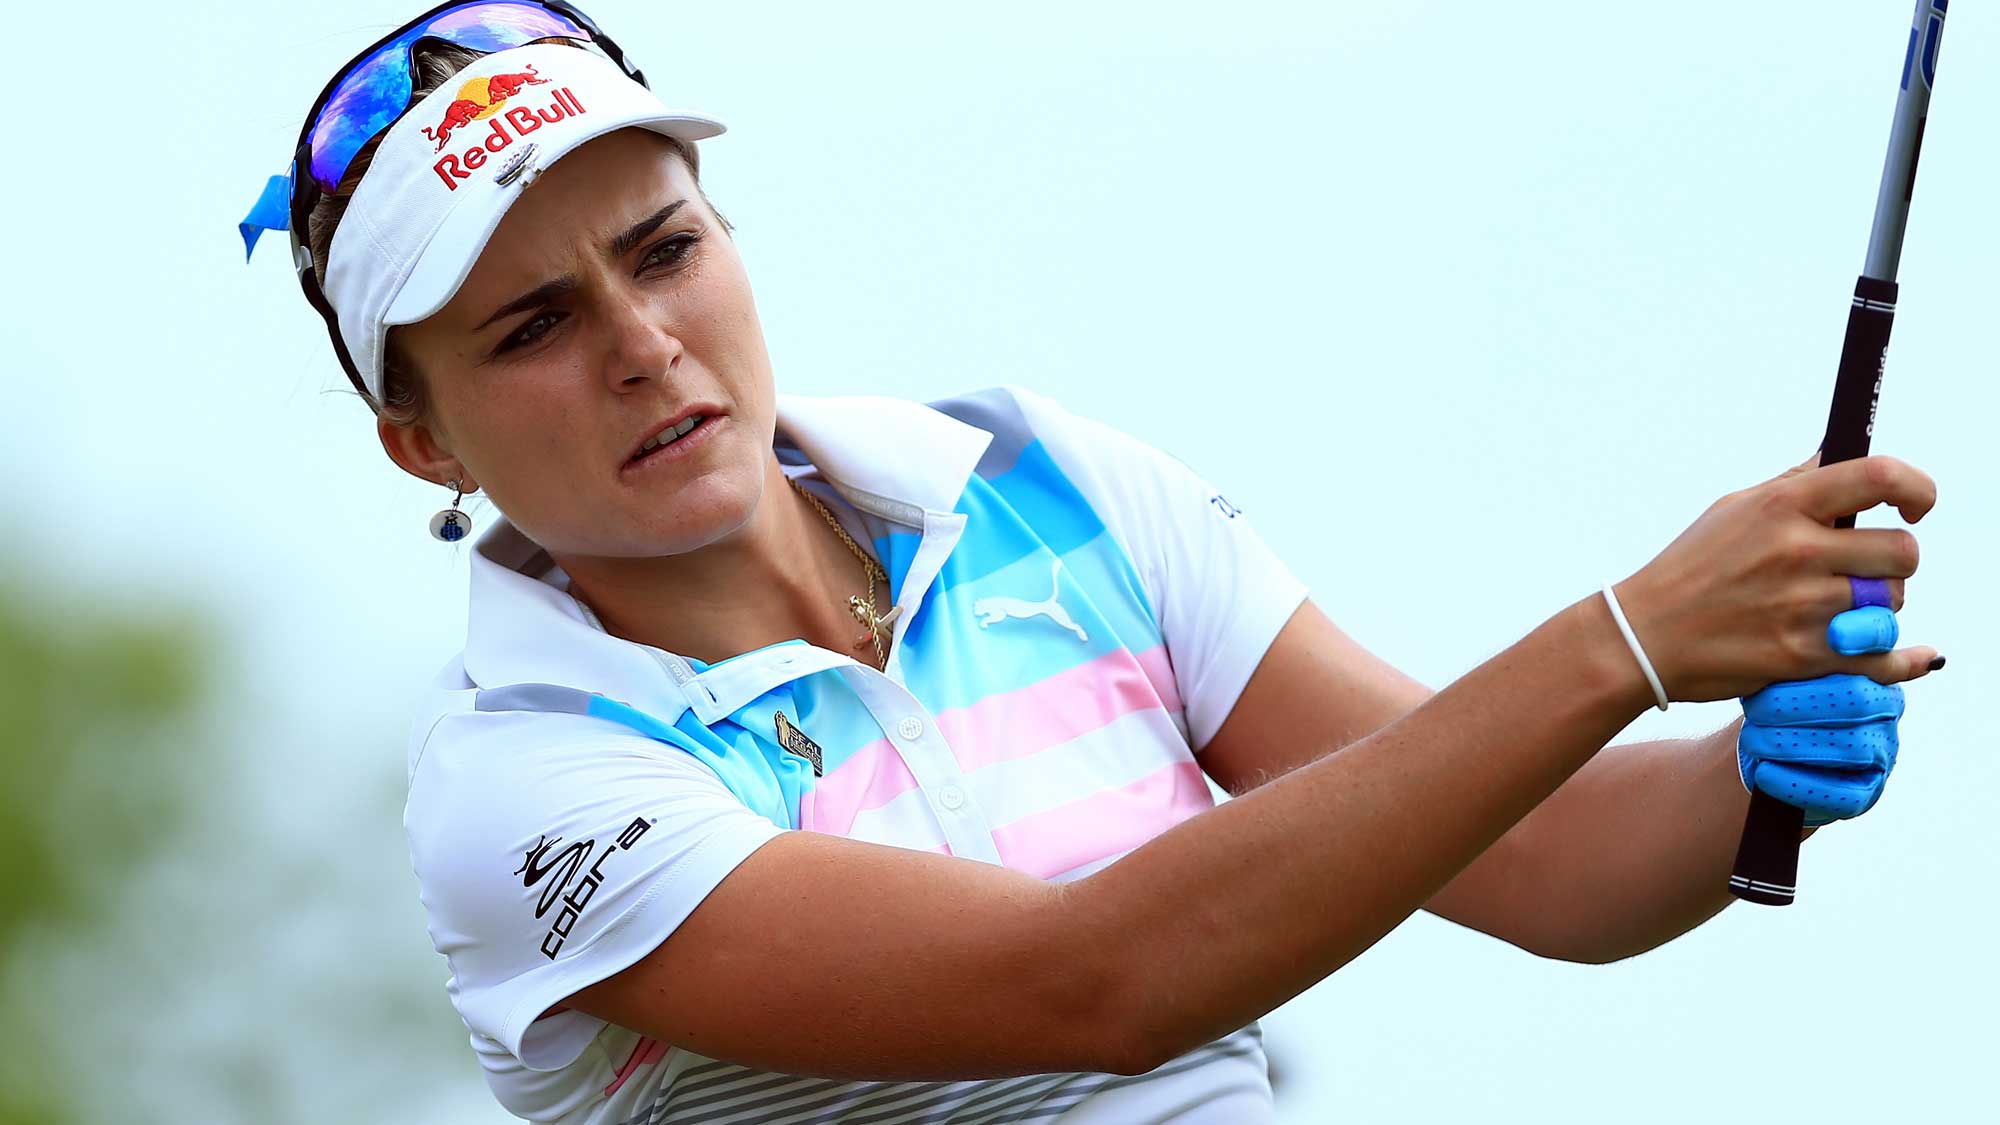 Lexi Thompson of the USA hits her tee shot on the 3rd hole during the final round of the Manulife LPGA Classic